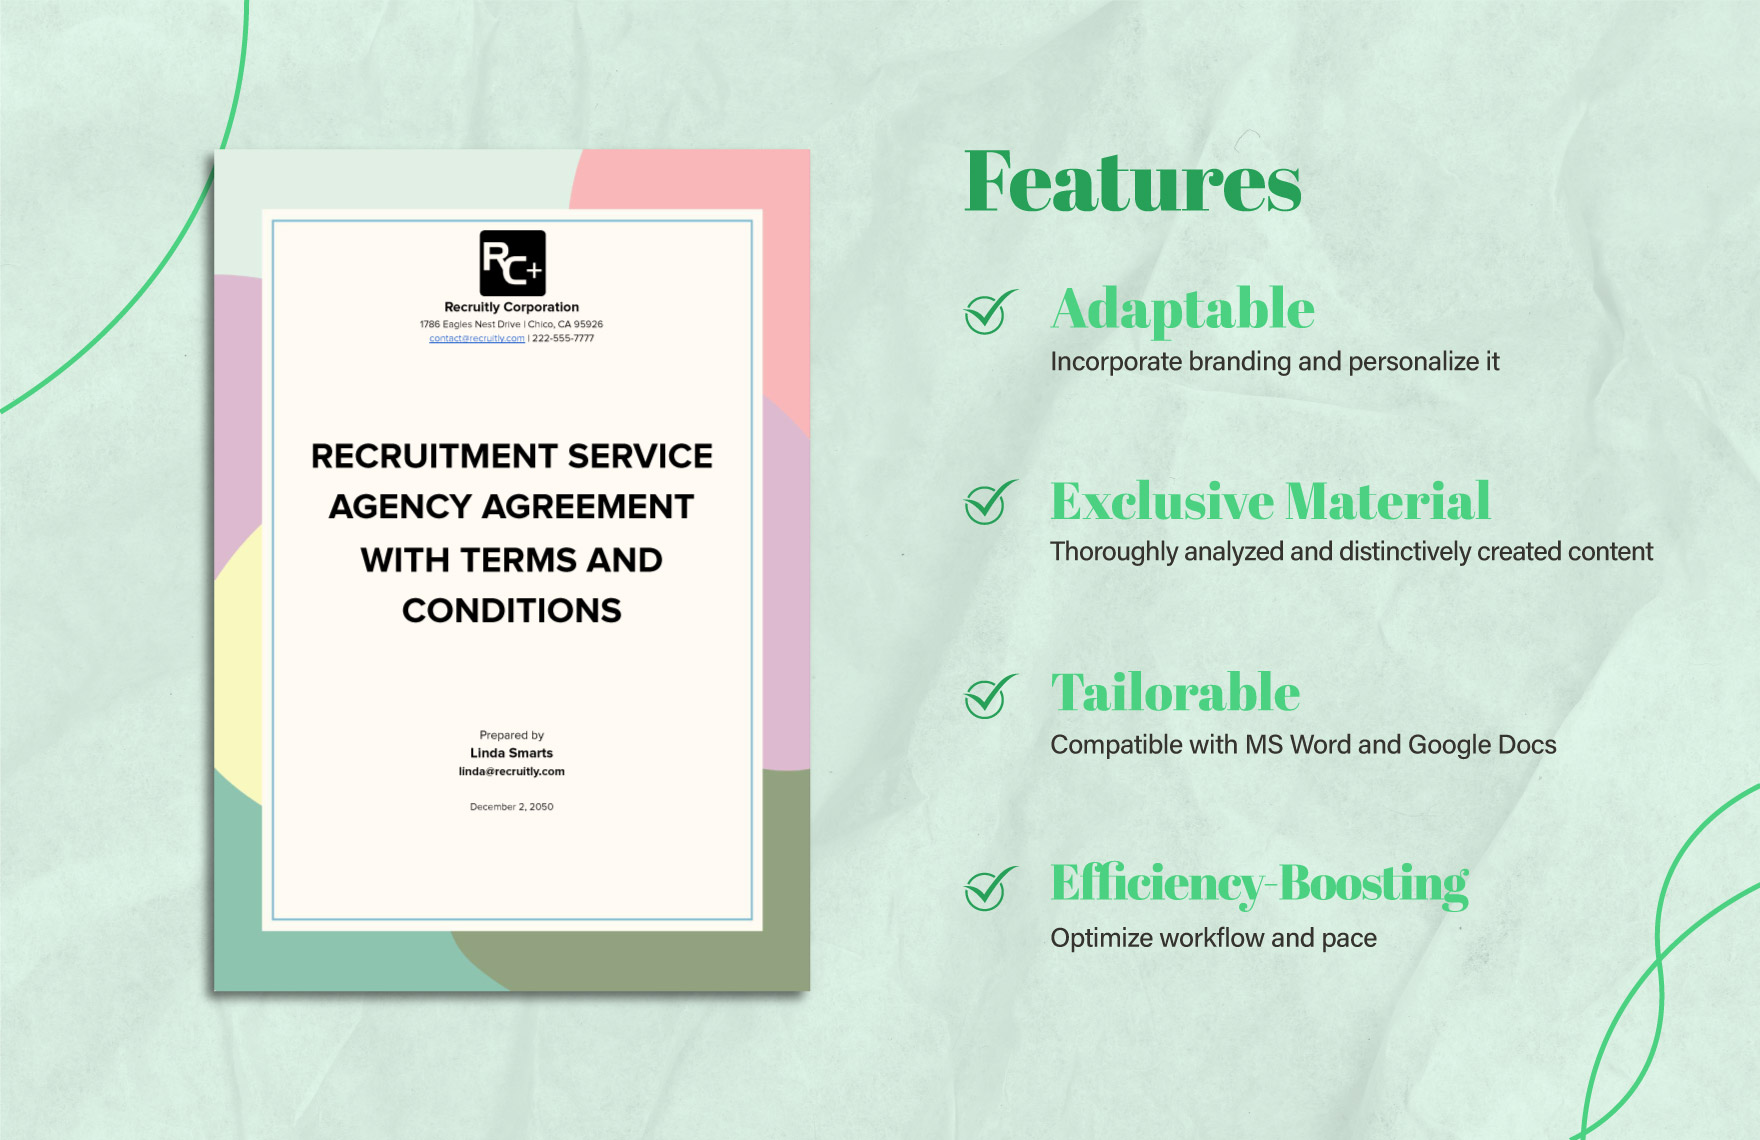 Recruitment Service Agency Agreement with Terms and Conditions